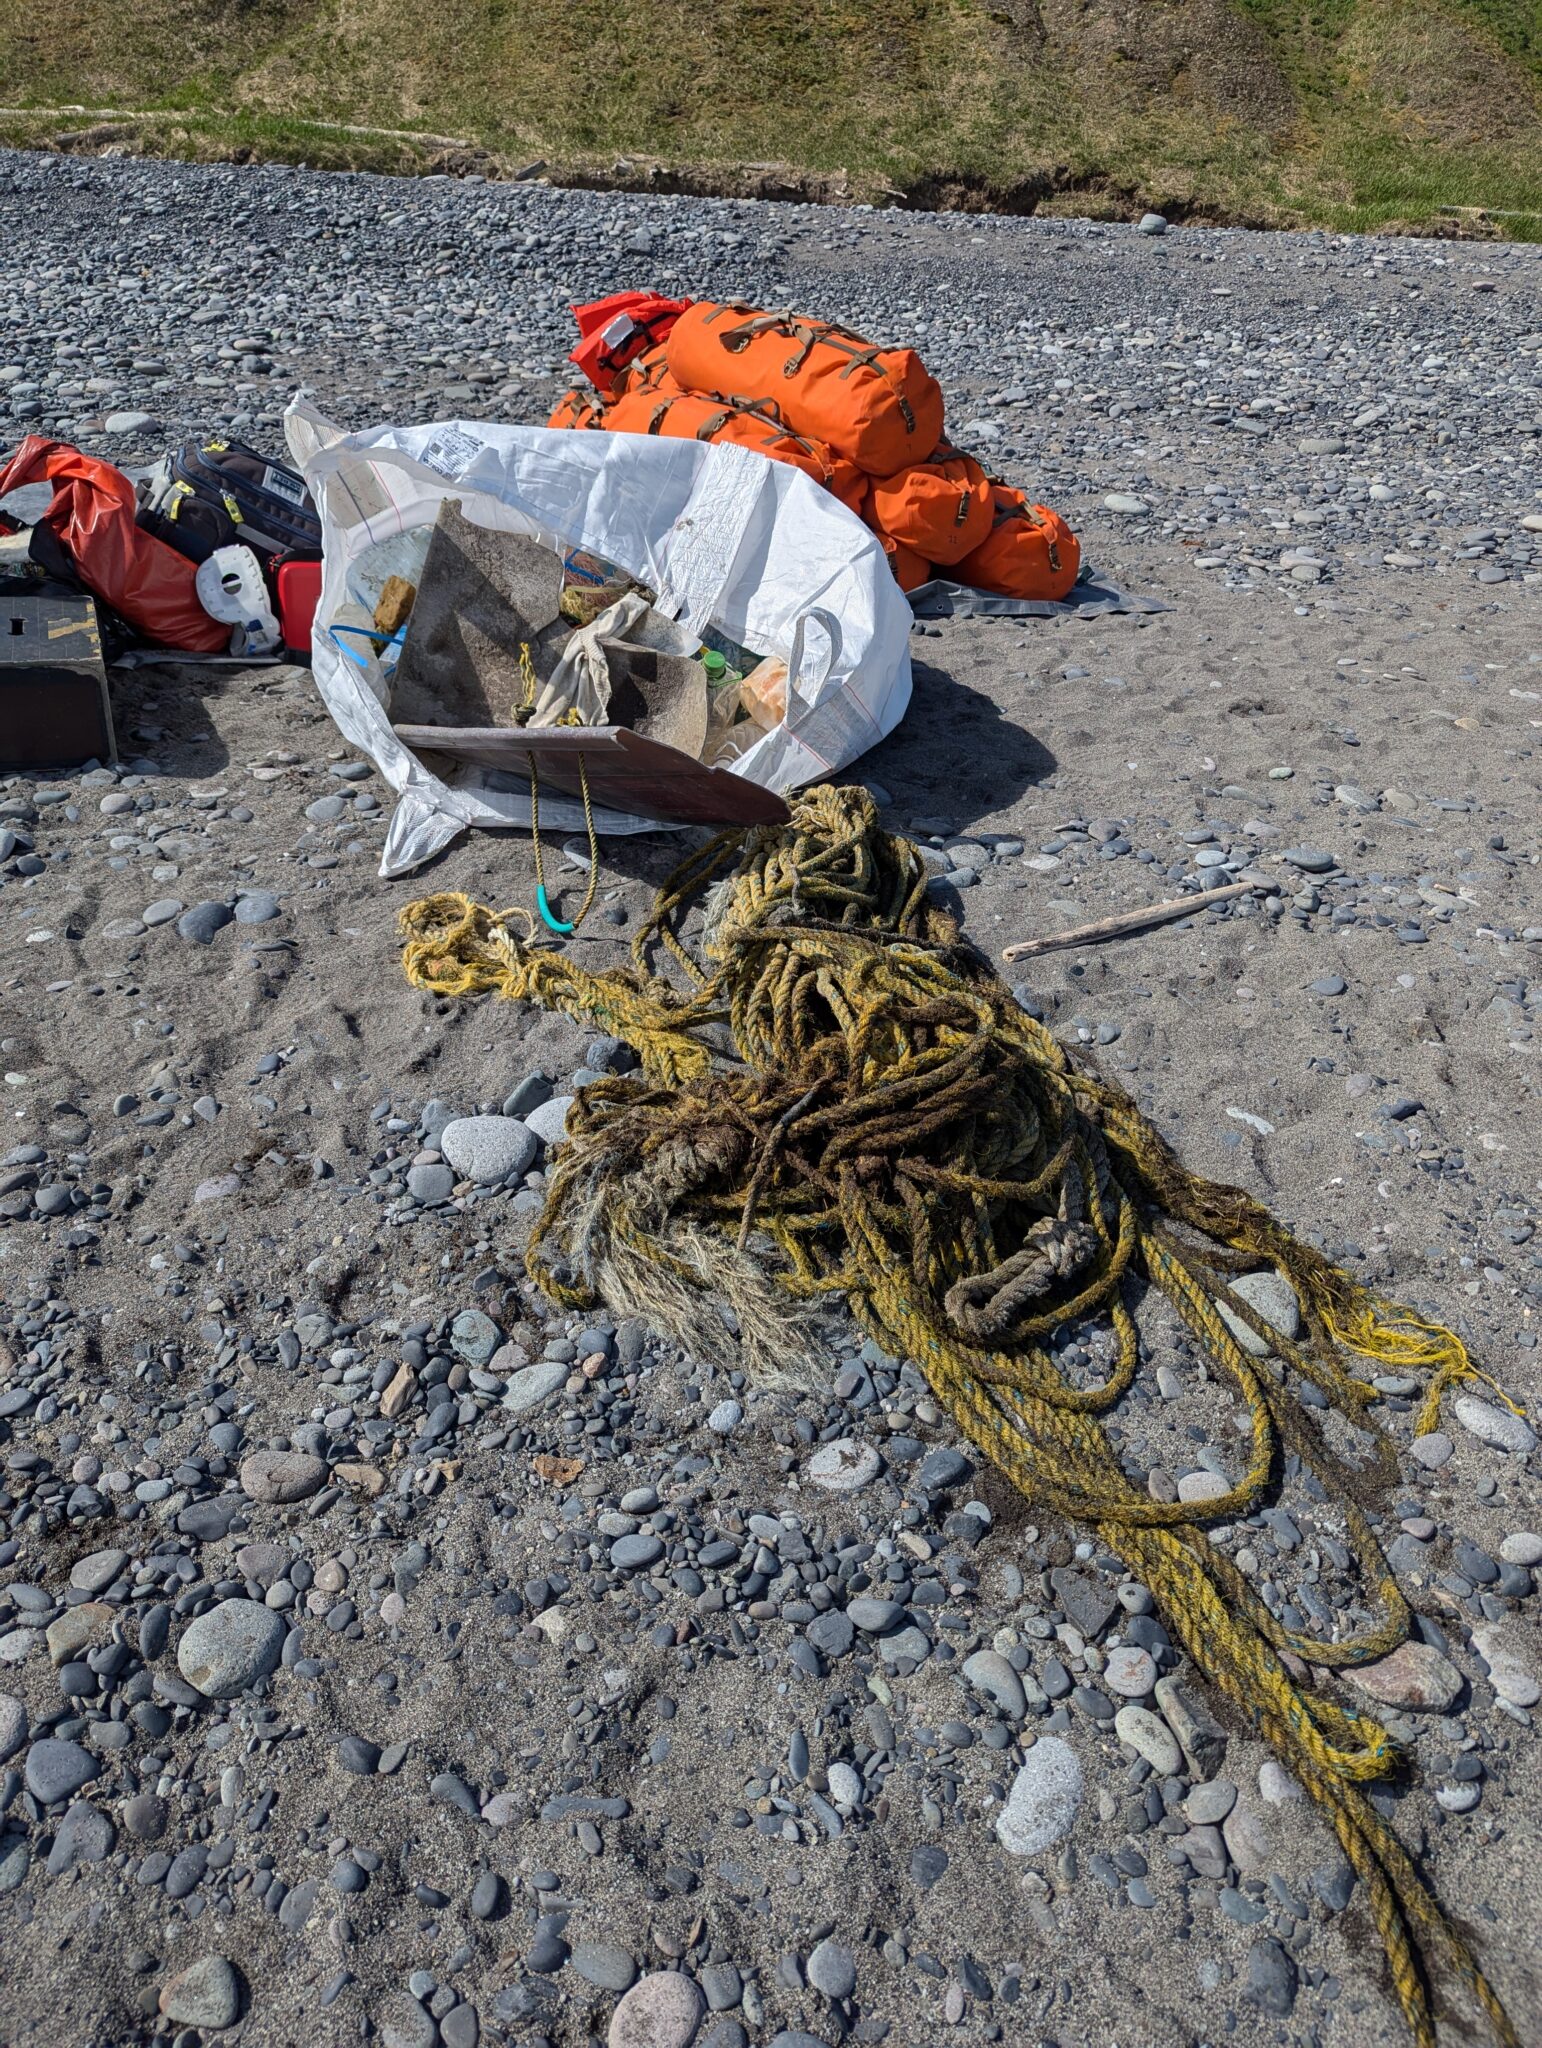 a pile of ropes and orange bags on a rocky beach